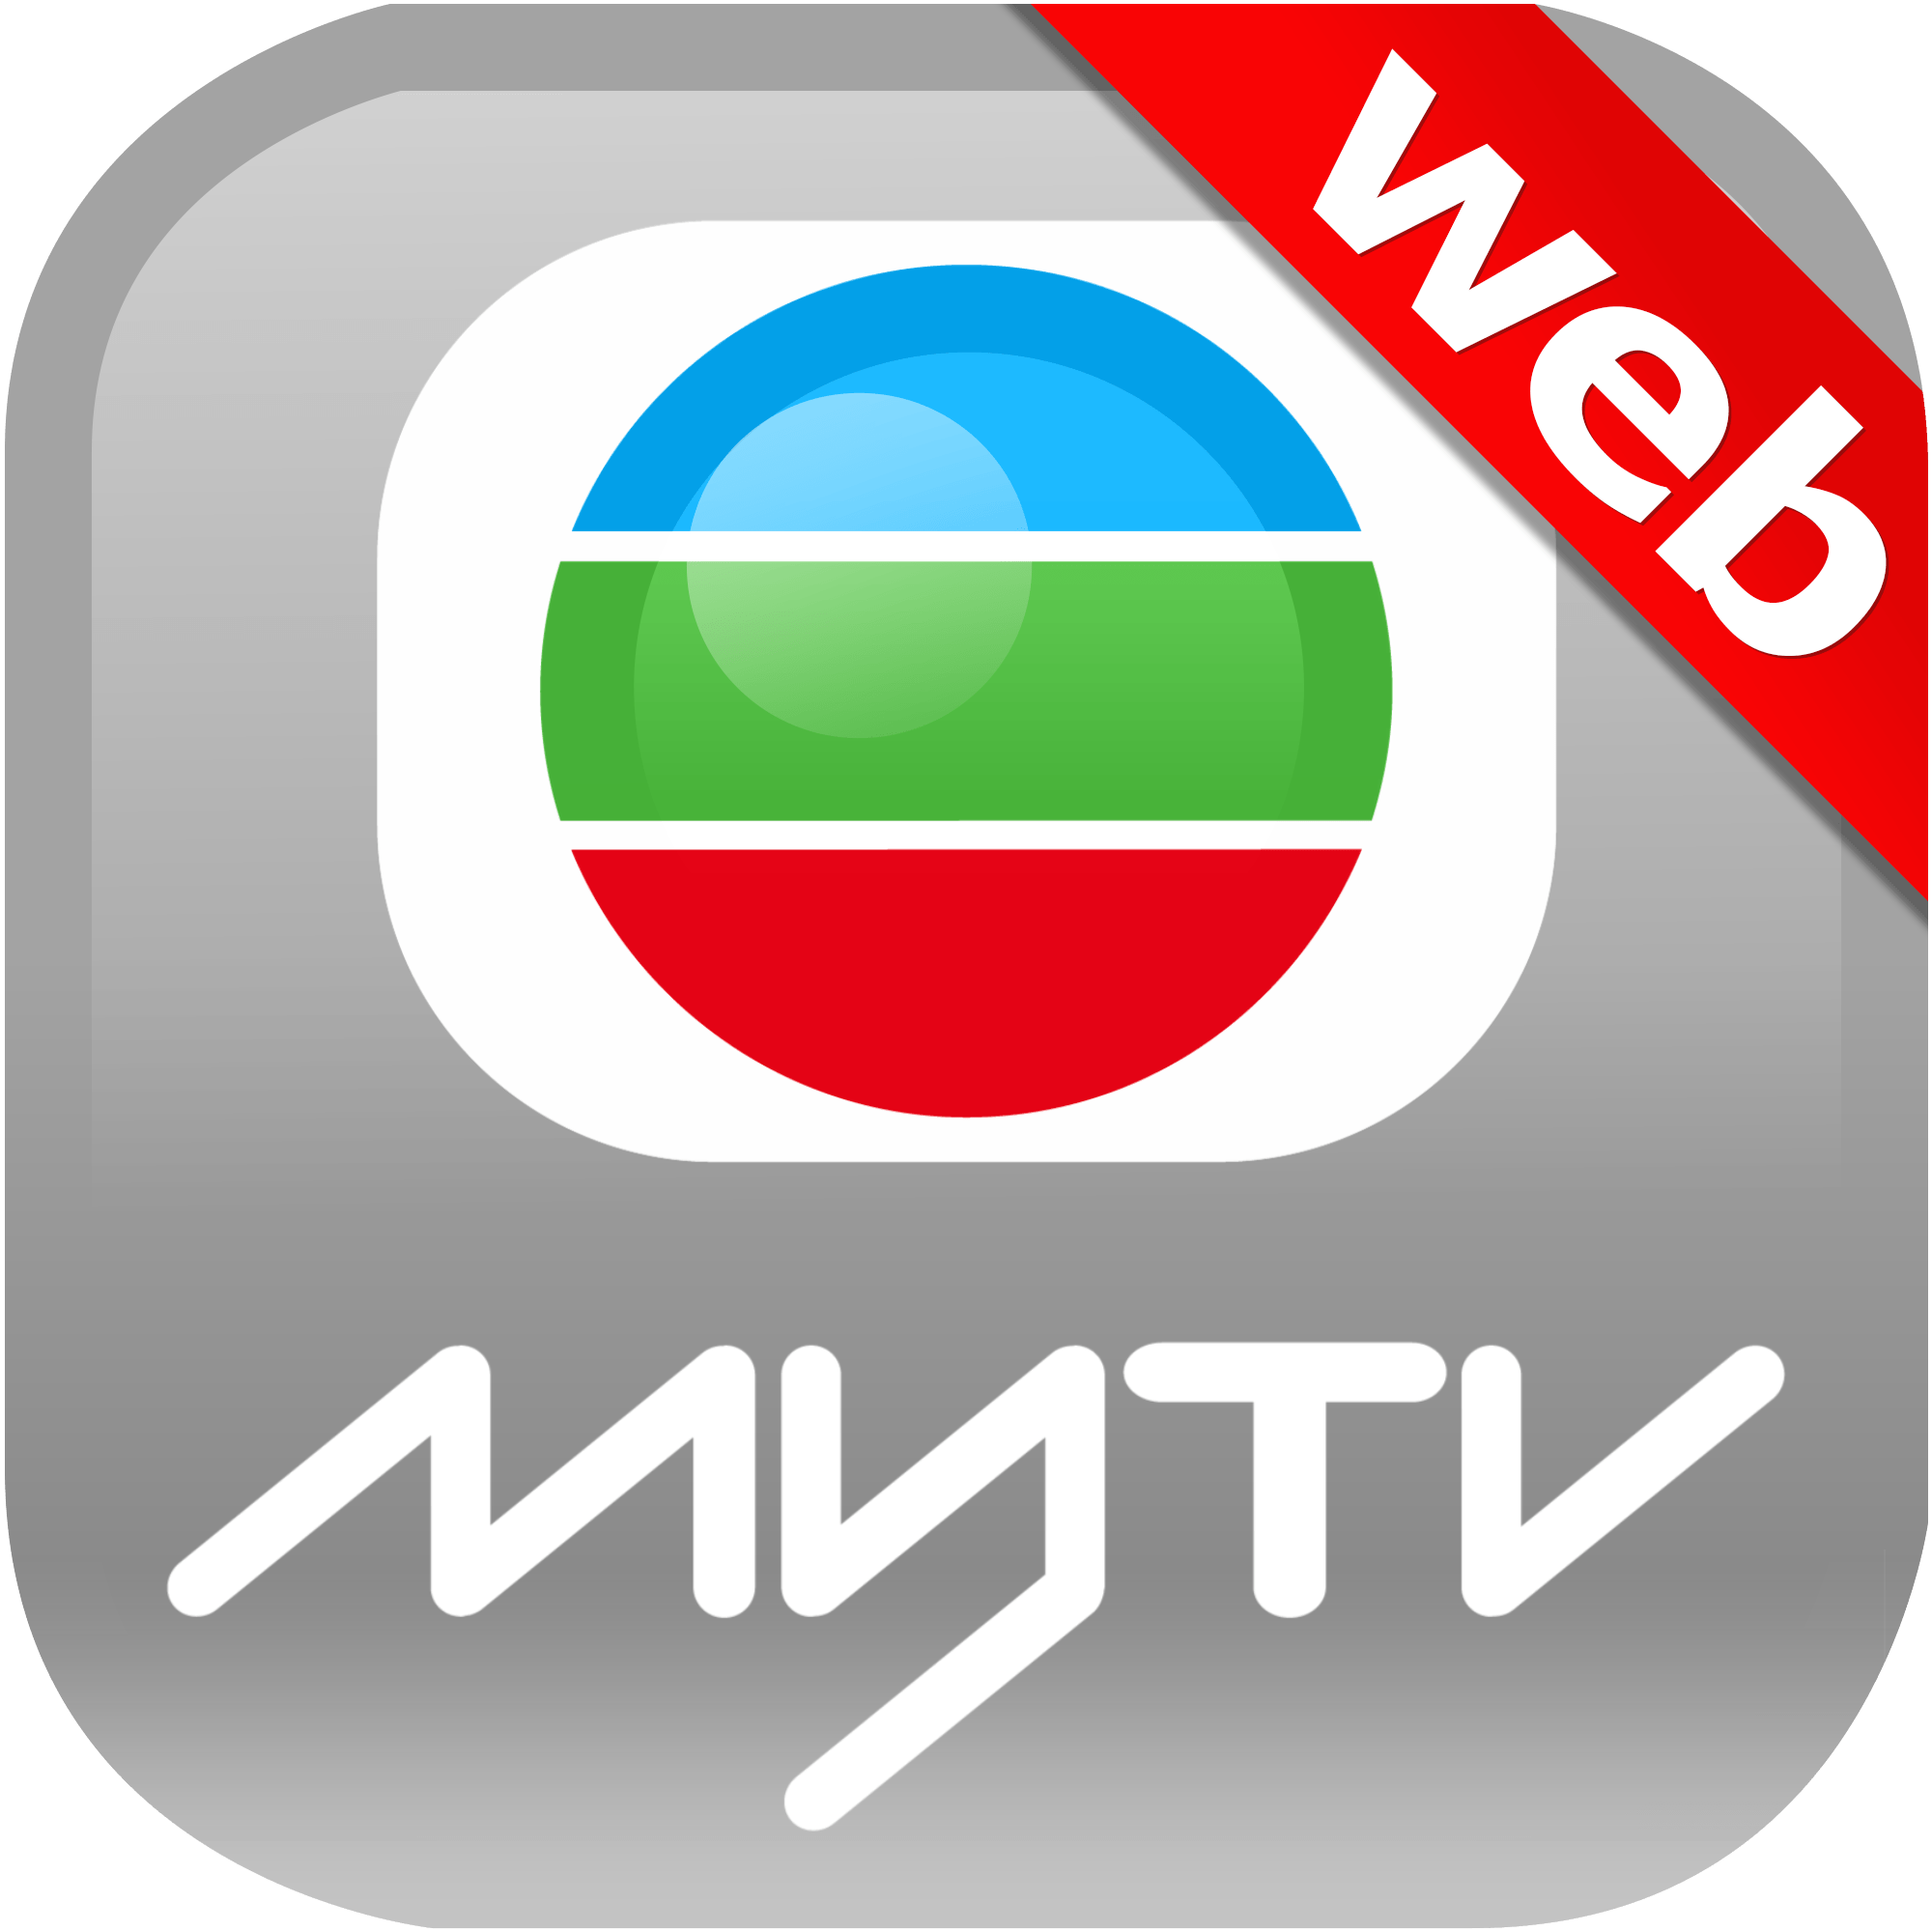 myTV Logo - Enterprise Search and Recommendation Engine for MyTV of TVB.com ...